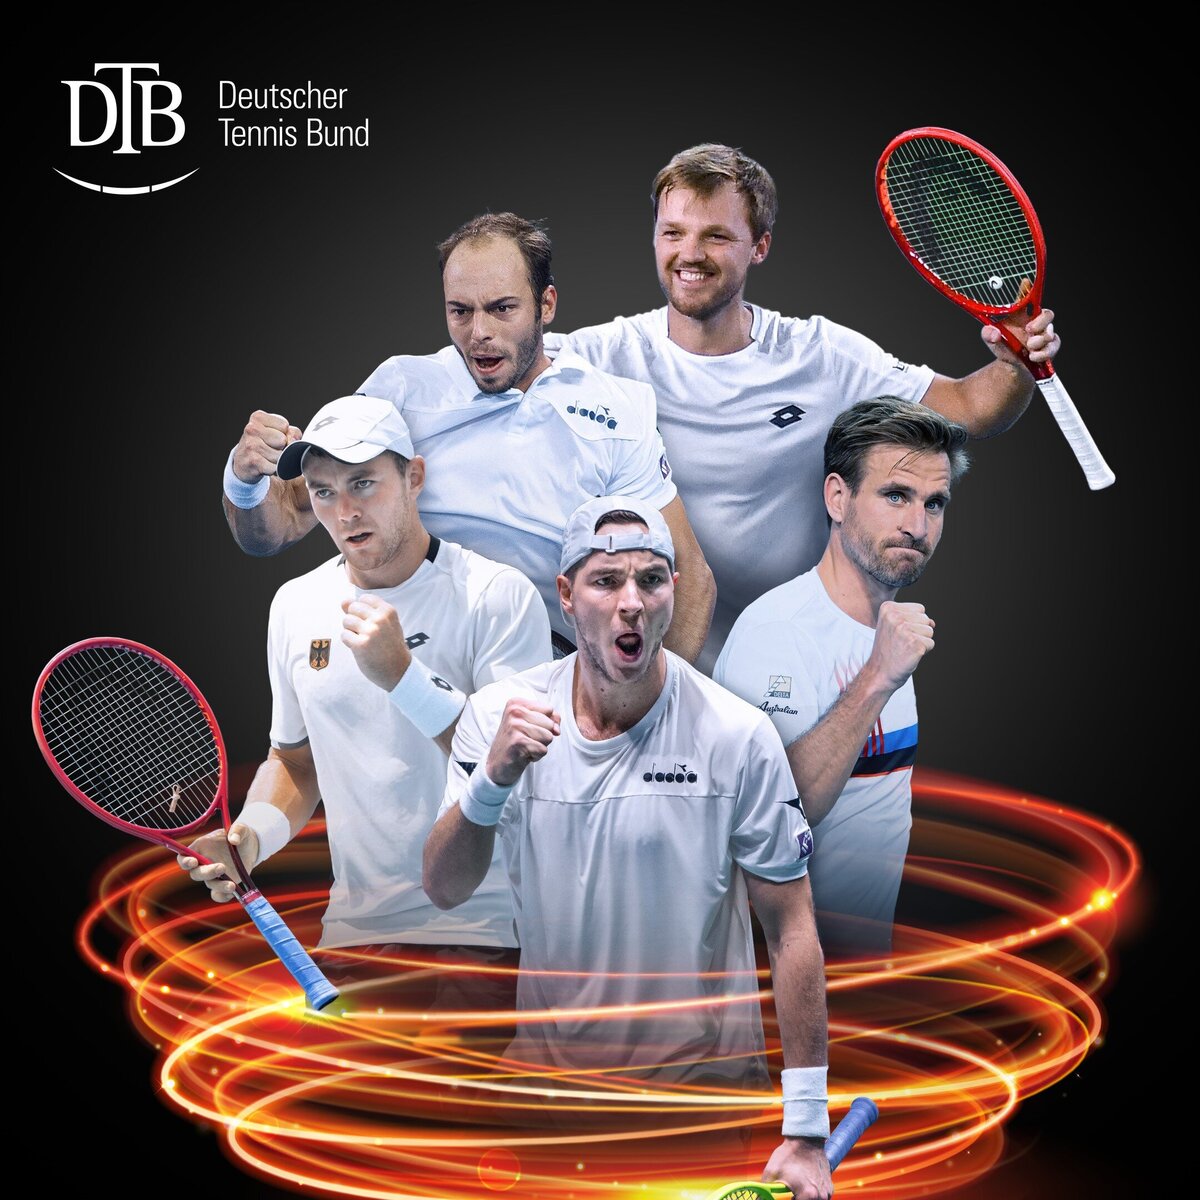 Davis Cup Germany squad with stuff and head